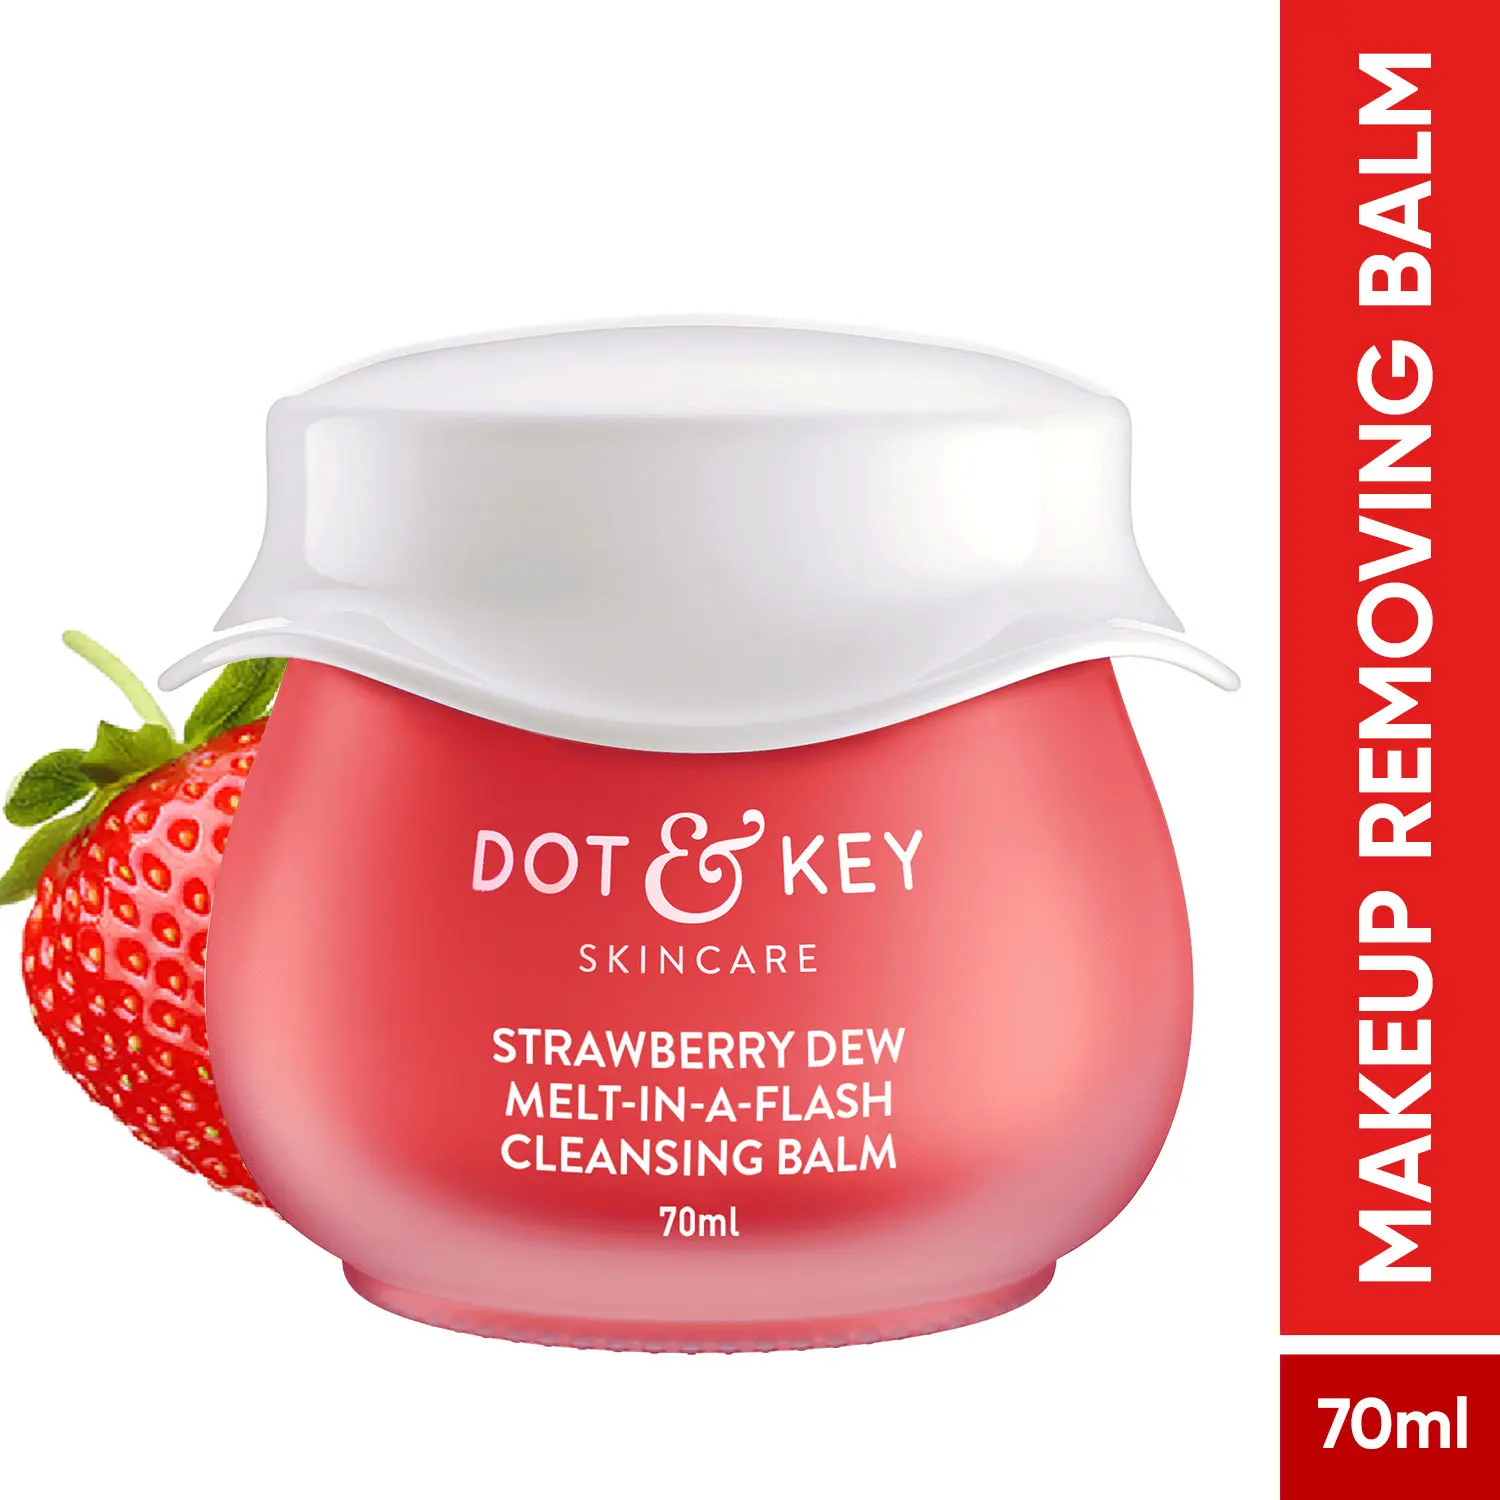 Dot & Key Strawberry Dew Melt-in-a-Flash Cleansing Balm | Makeup Removing Balm - 70 ml